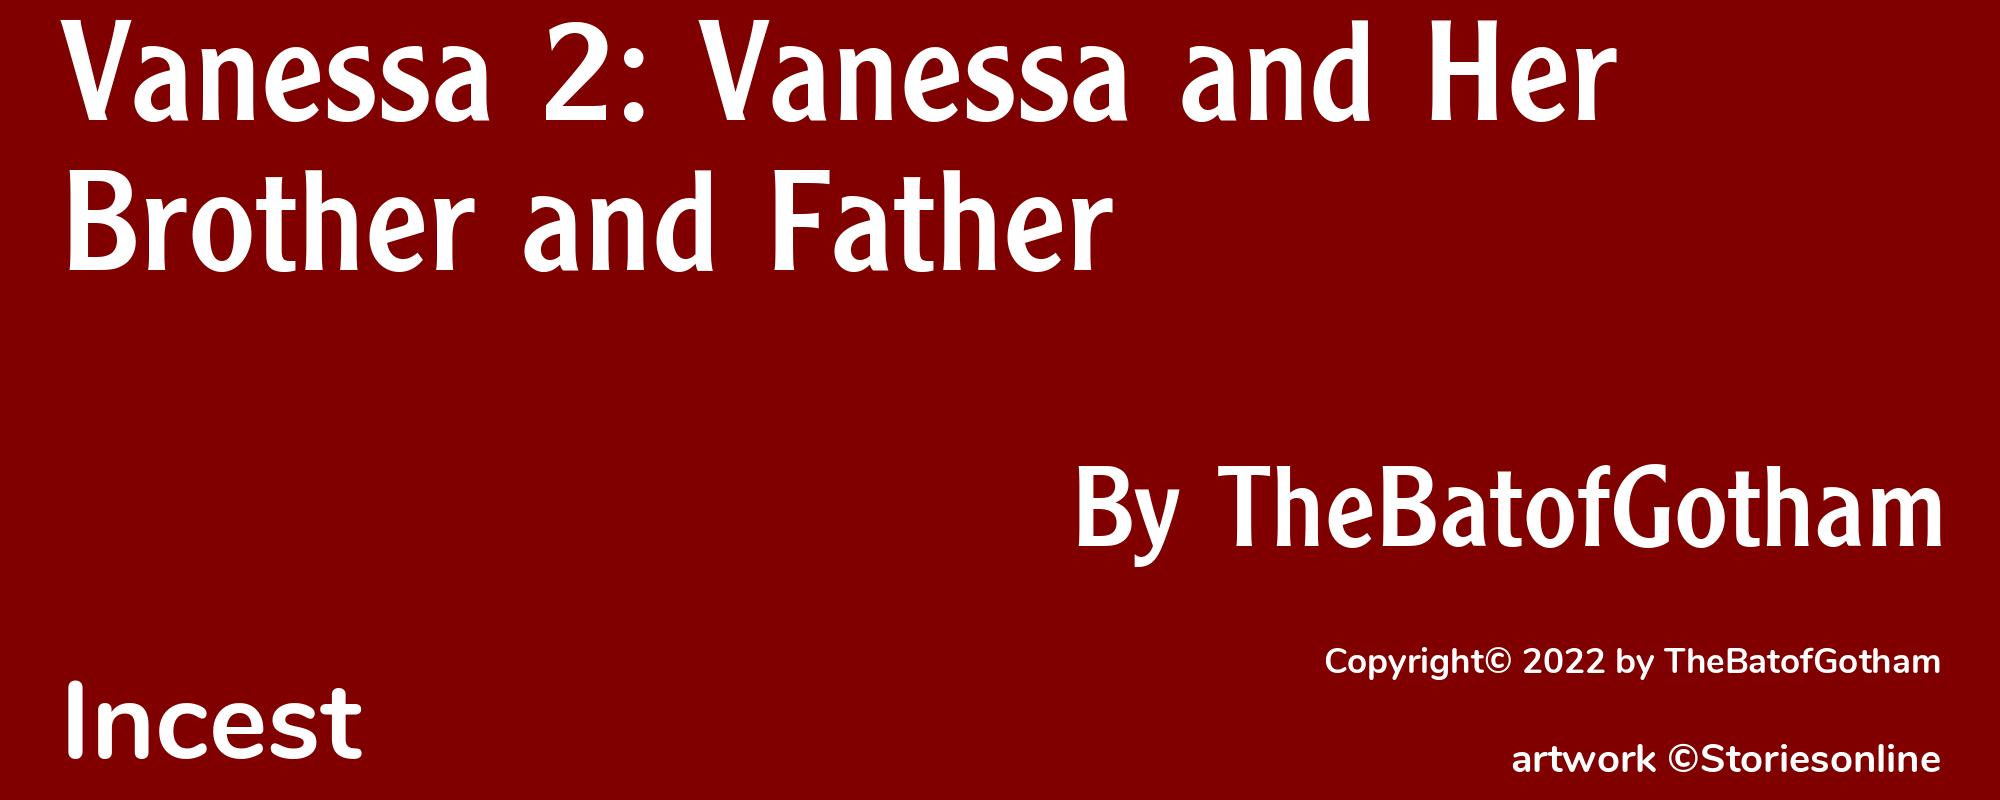 Vanessa 2: Vanessa and Her Brother and Father - Cover